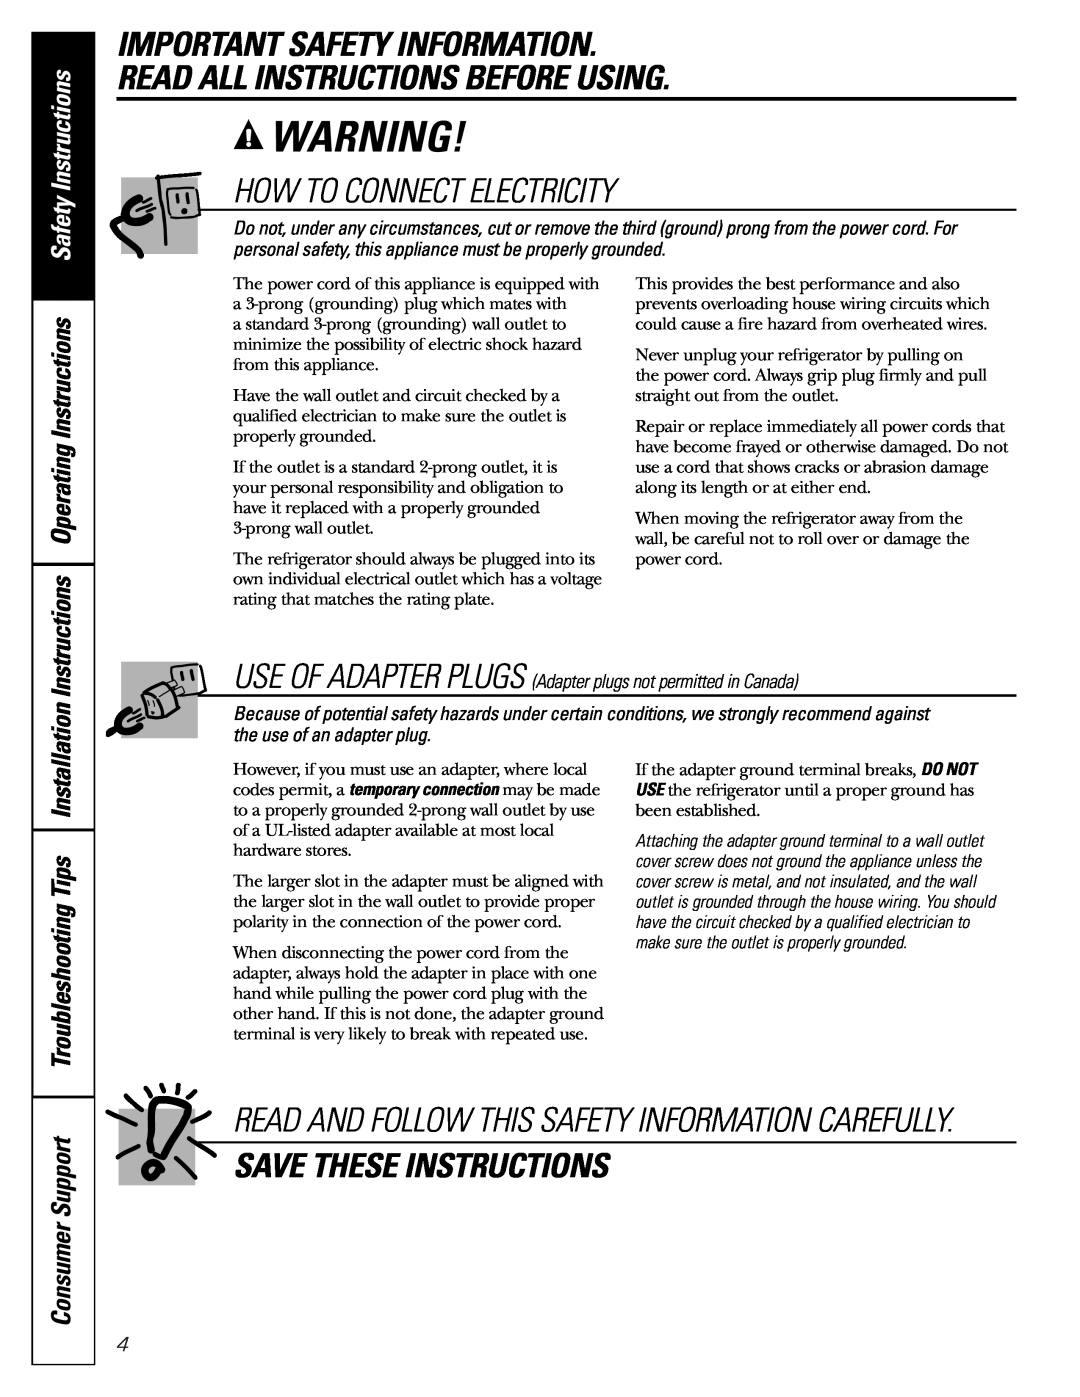 GE Monogram 23 How To Connect Electricity, Save These Instructions, Troubleshooting Tips, Consumer Support 